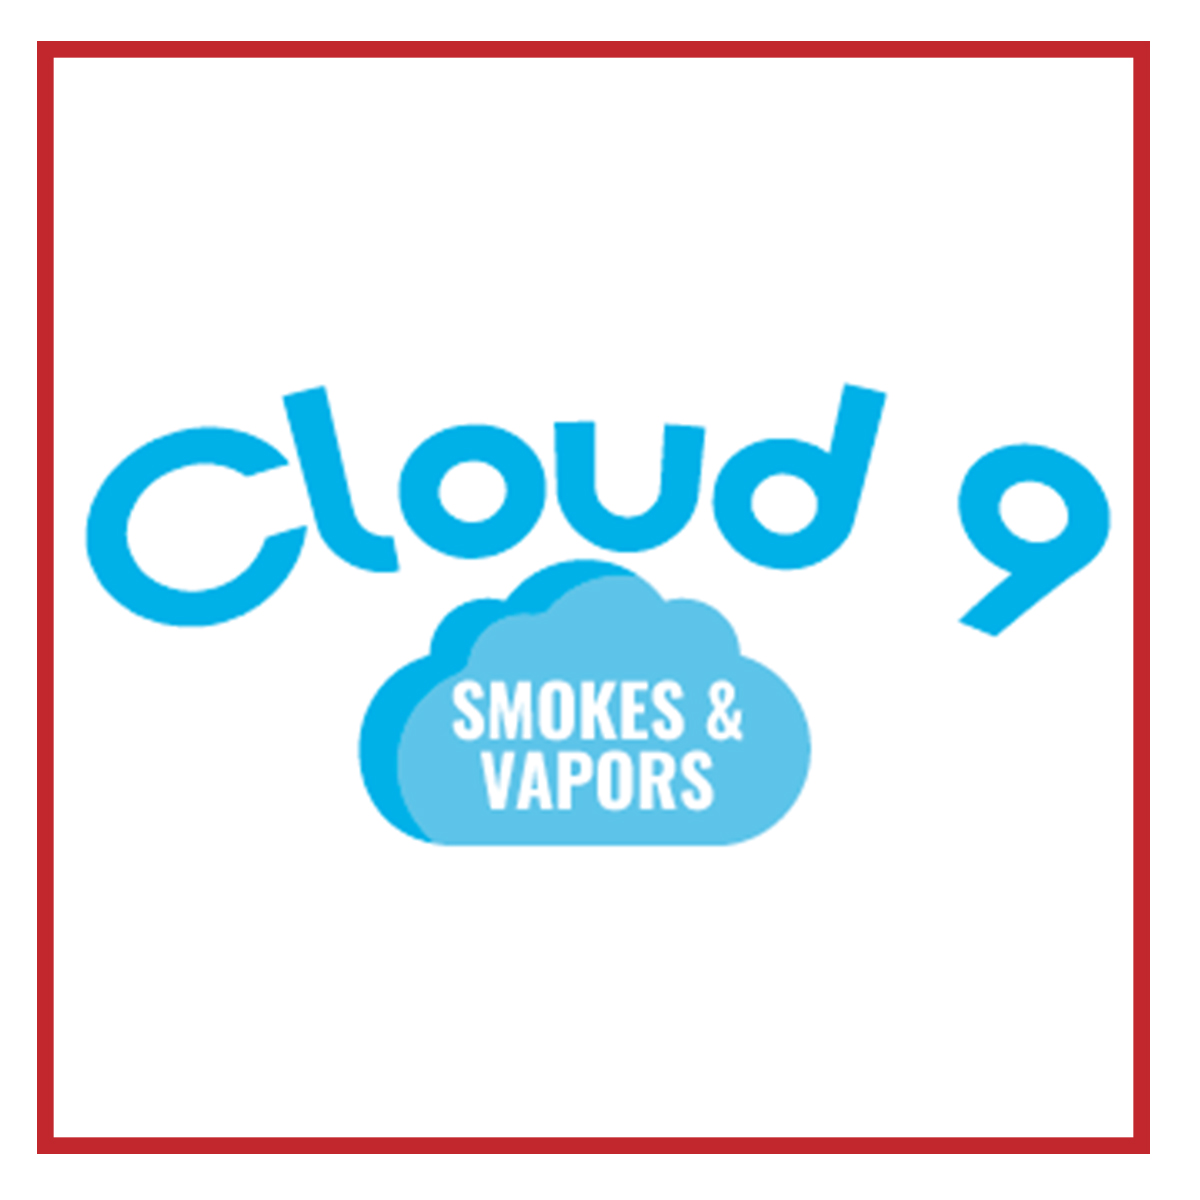 You are currently viewing Cloud 9 Smokes & Vapors